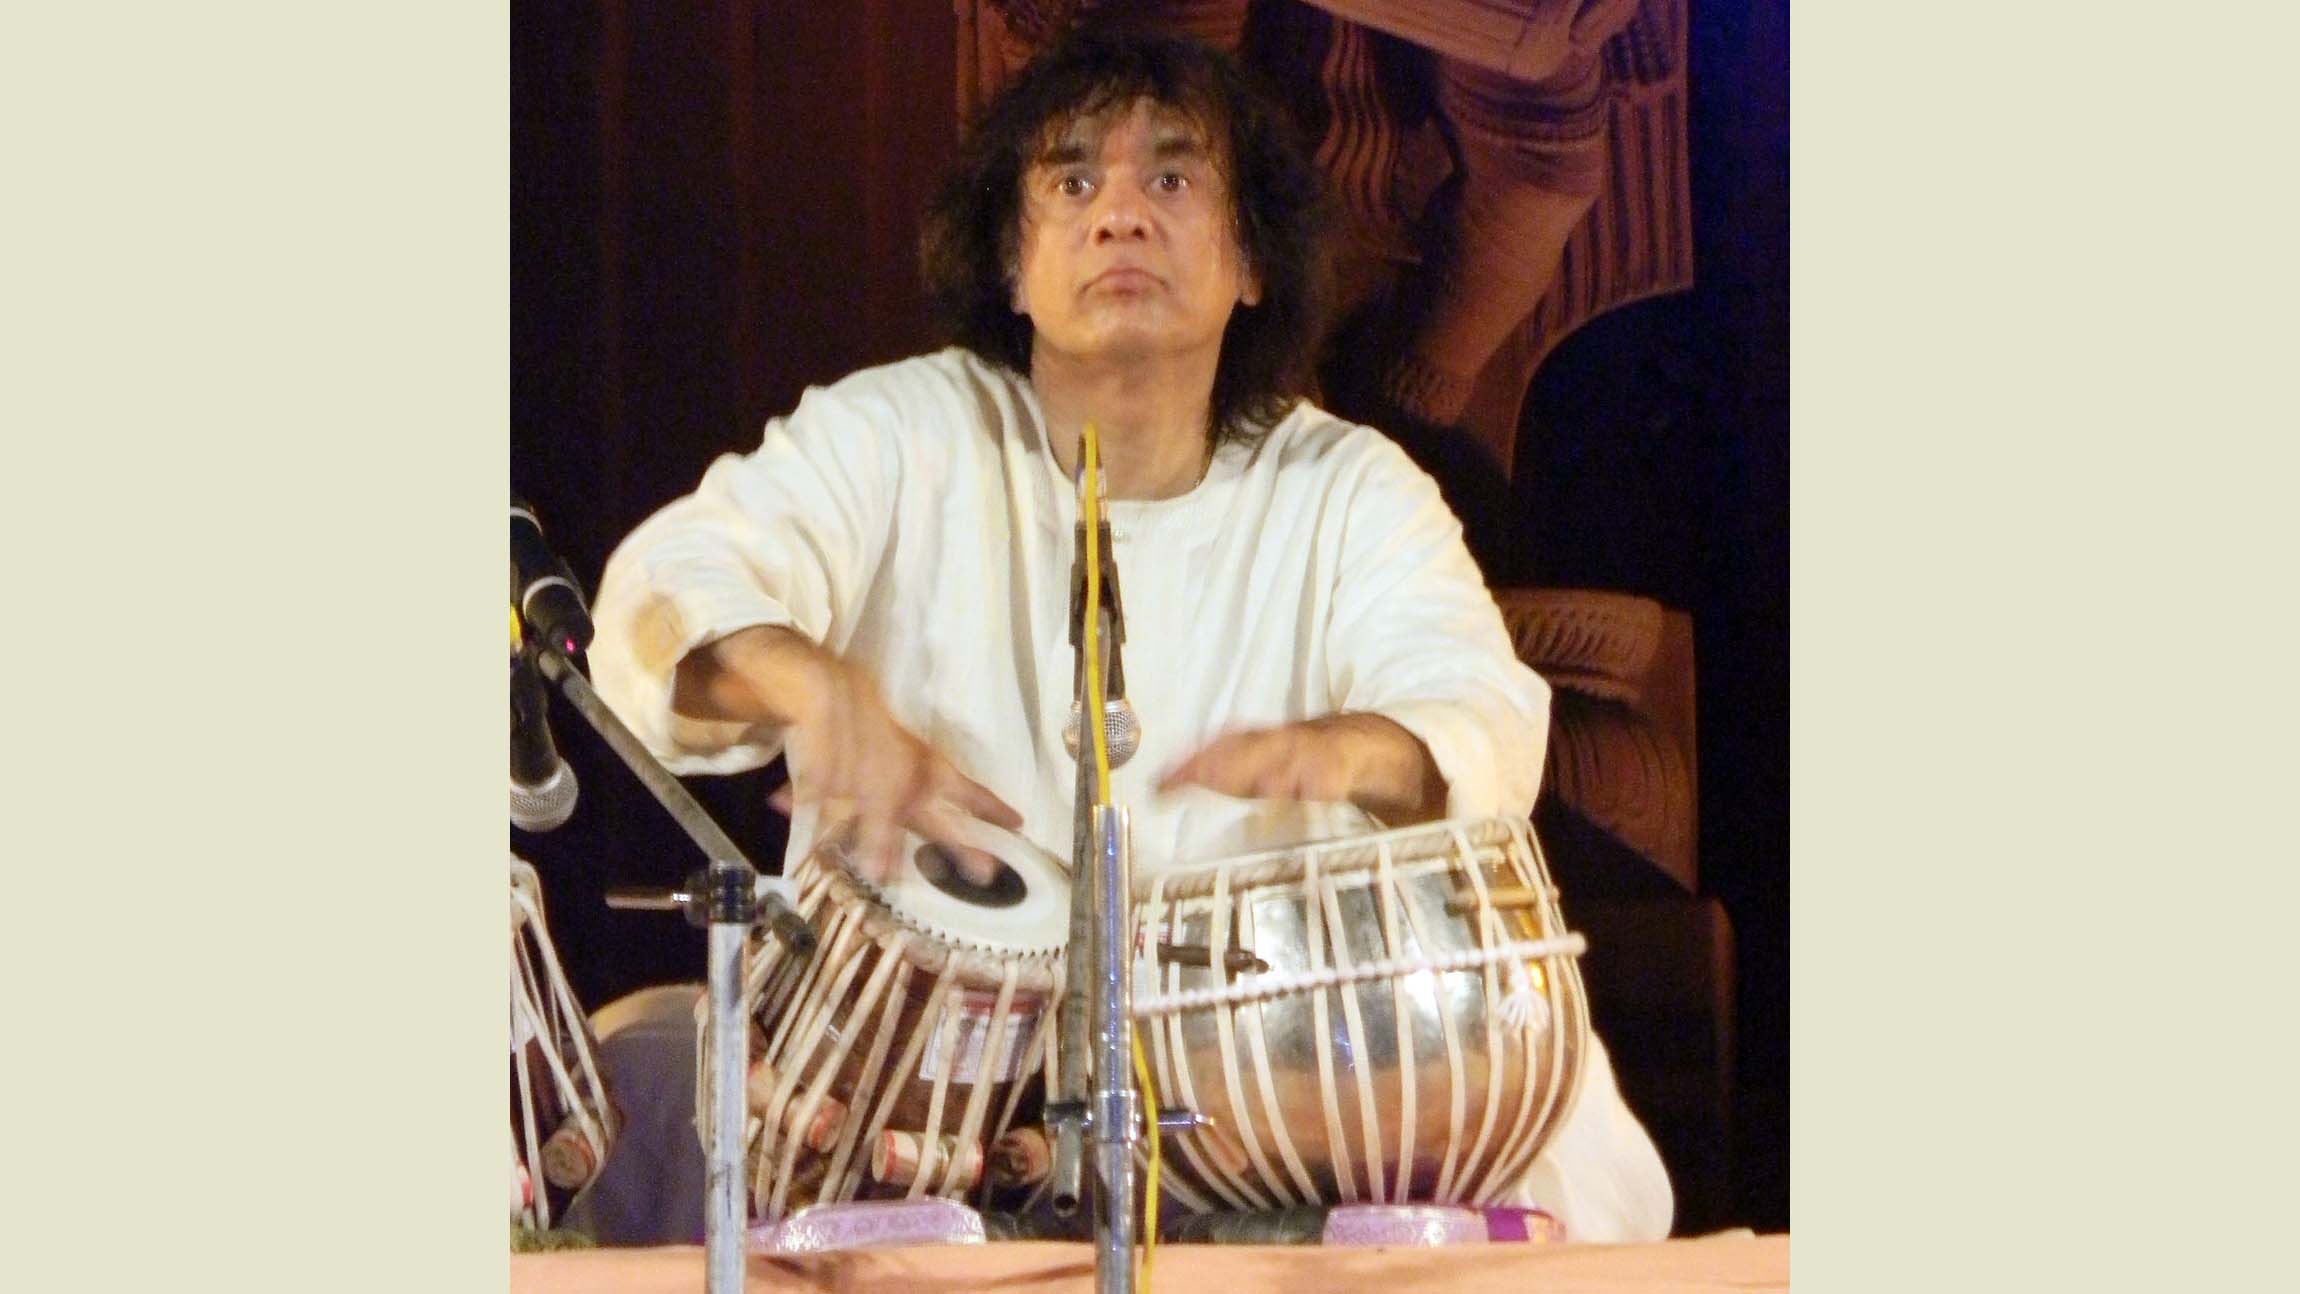 man playing drums in a white robe